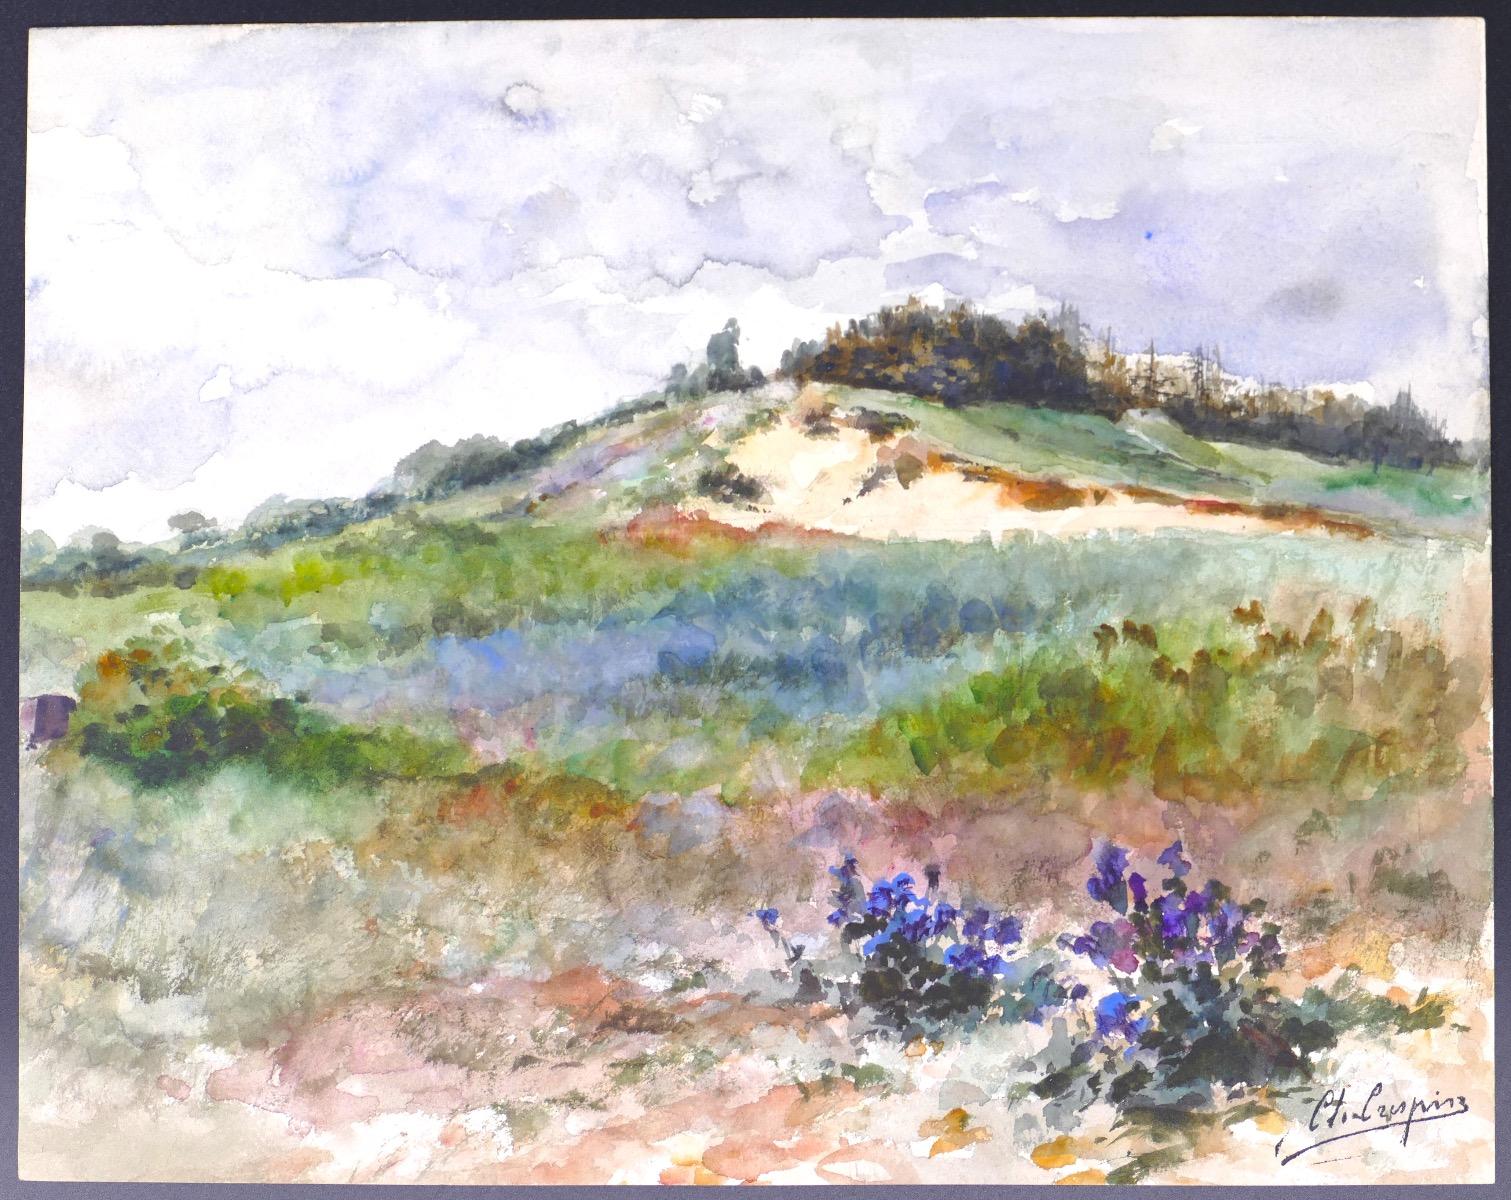 Paysage de Colline is a colorful original watercolor painting on paper, realized at the first decades of 20th Century by the Belgian Art Nouveau artist, Louis Adolphe Charle Crespin (1859-1944).

In very good conditions, with bright colors, at the